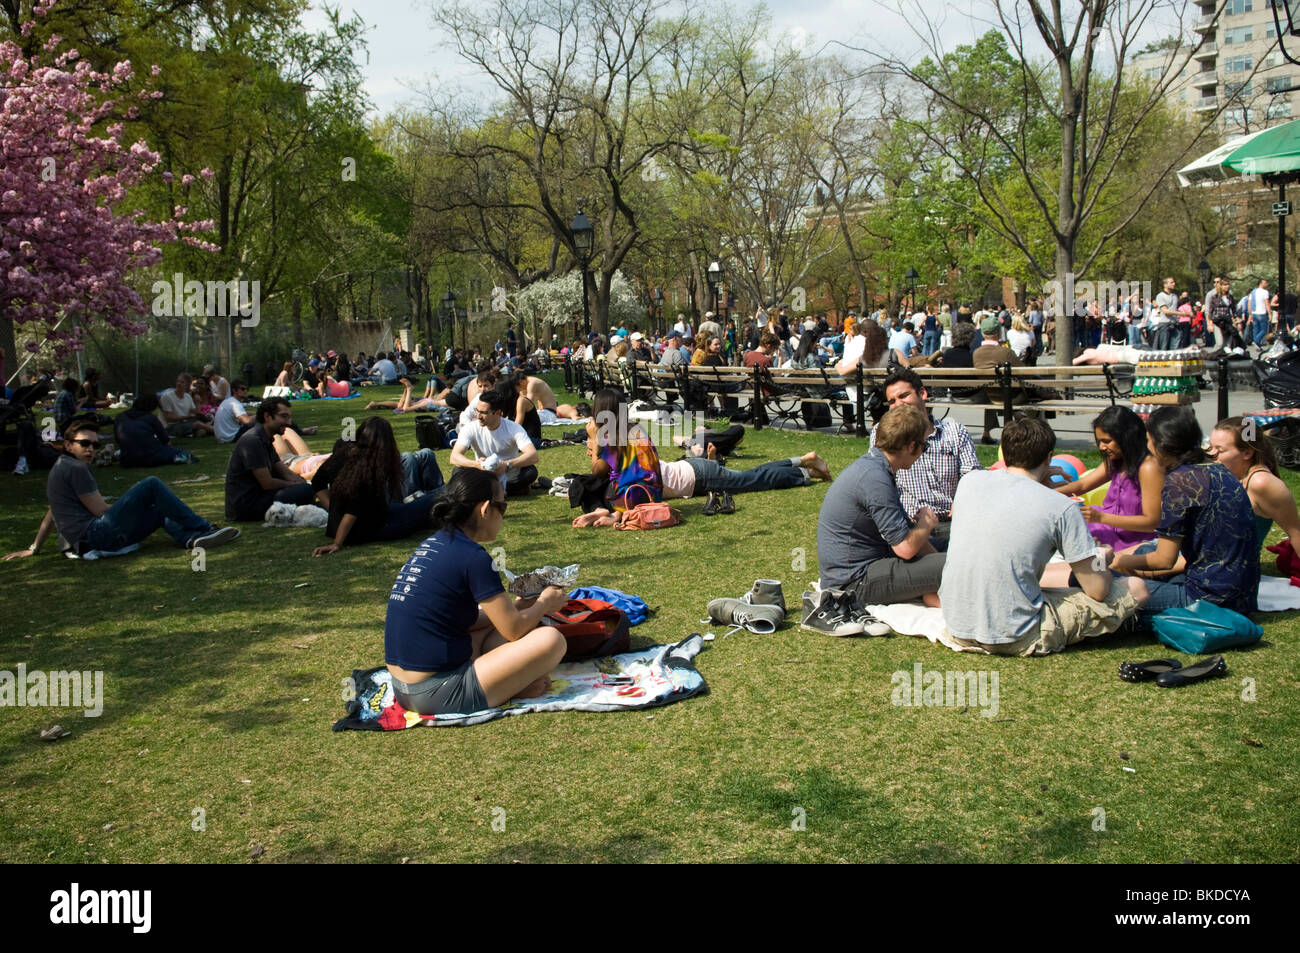 New Yorkers and visitors take advantage of the warm spring weather on a lawn in Washington Square Park in New York Stock Photo